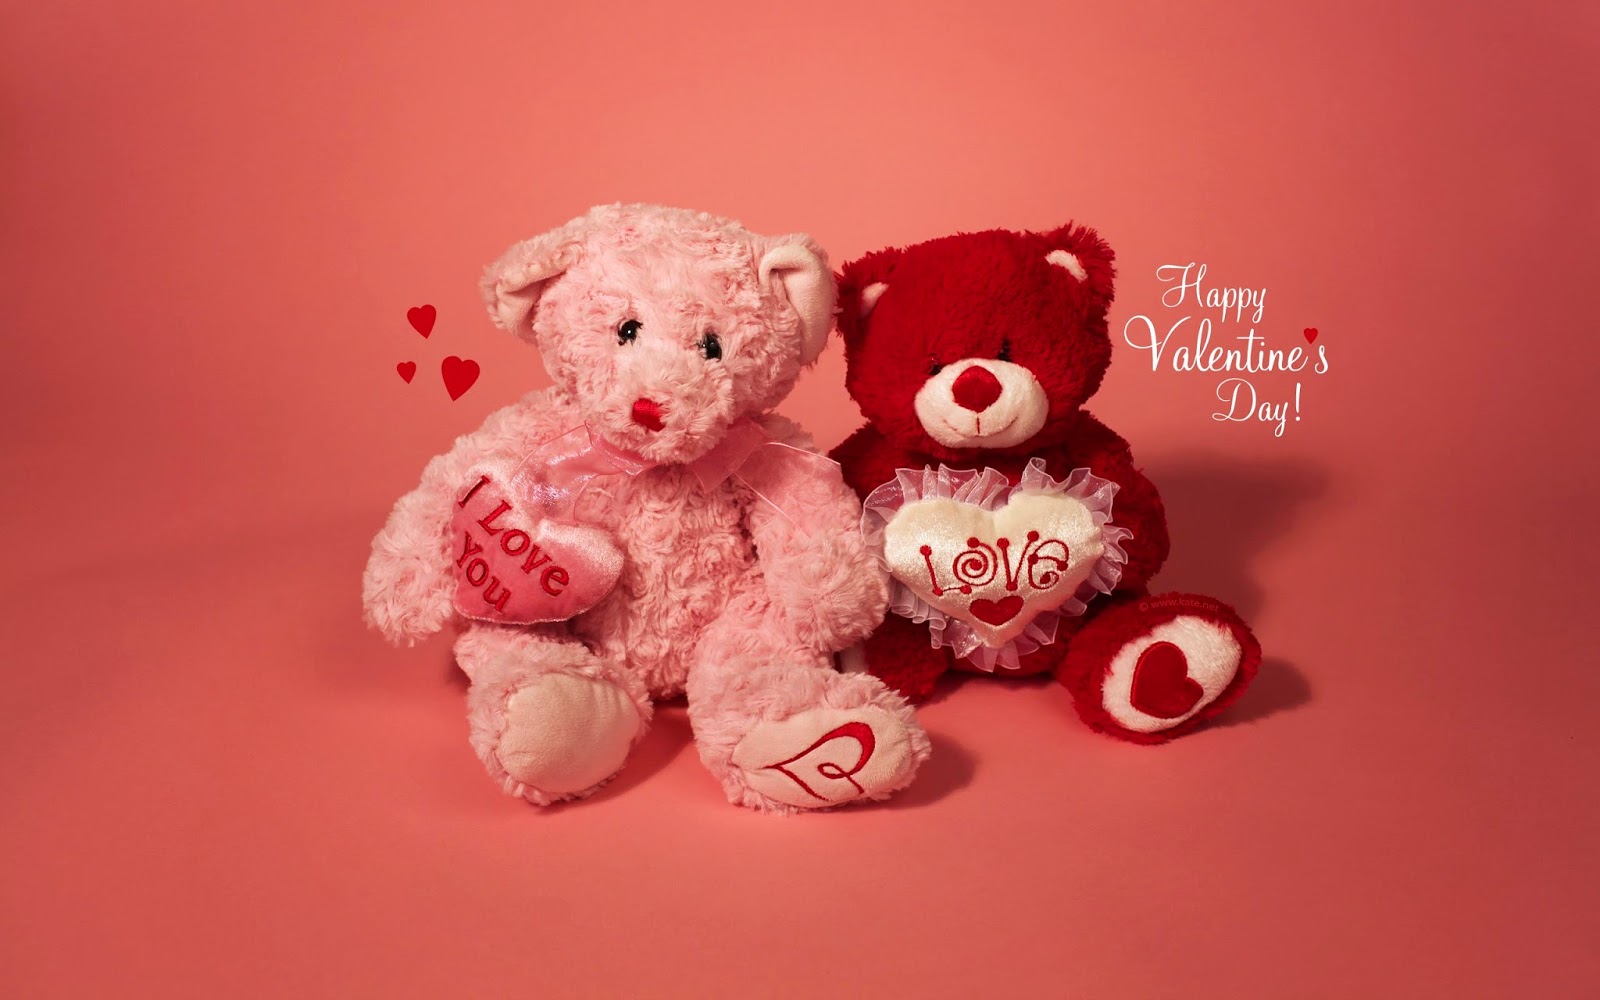 Teddy Bears Love 2015 Pictures, Latest HD Wallpapers & Images